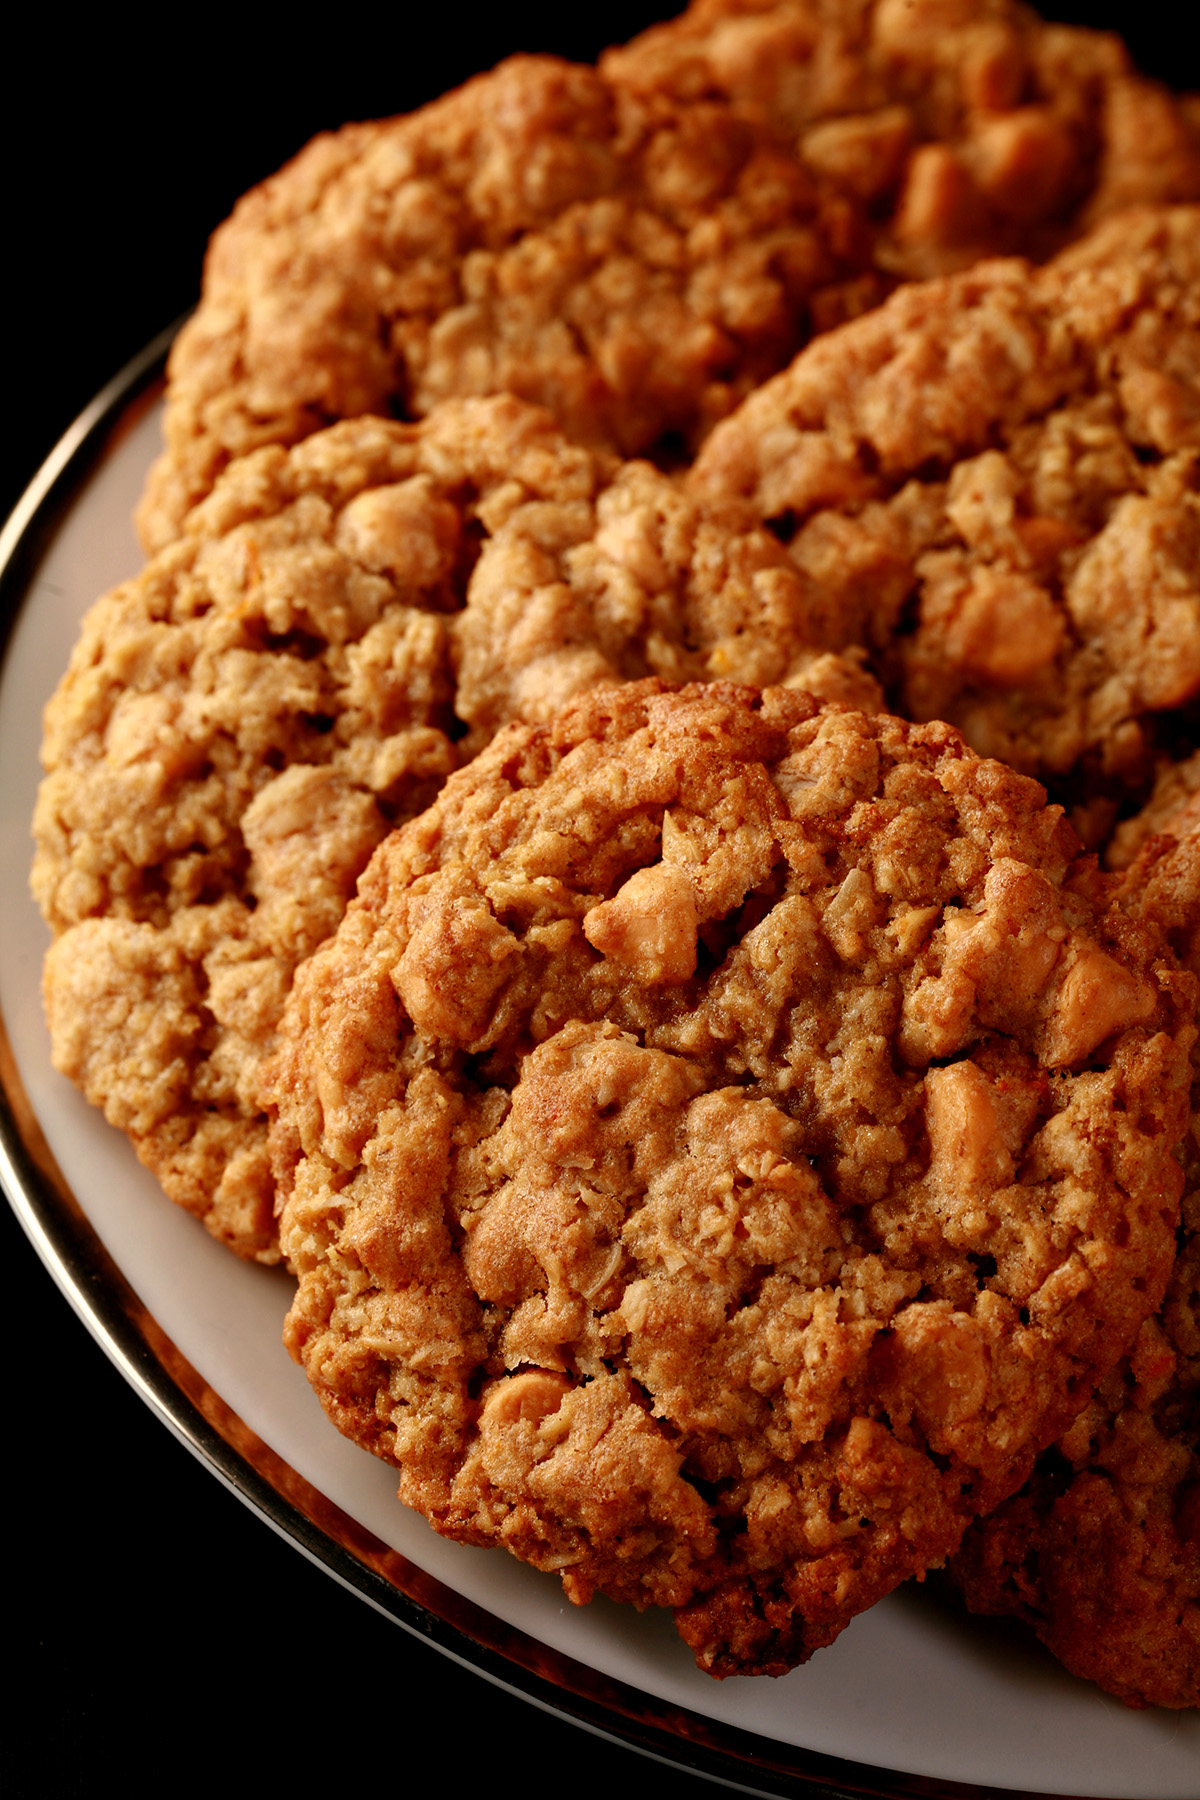 Close up photo of a plate of gluten-free oatmeal cookies with visible butterscotch chips